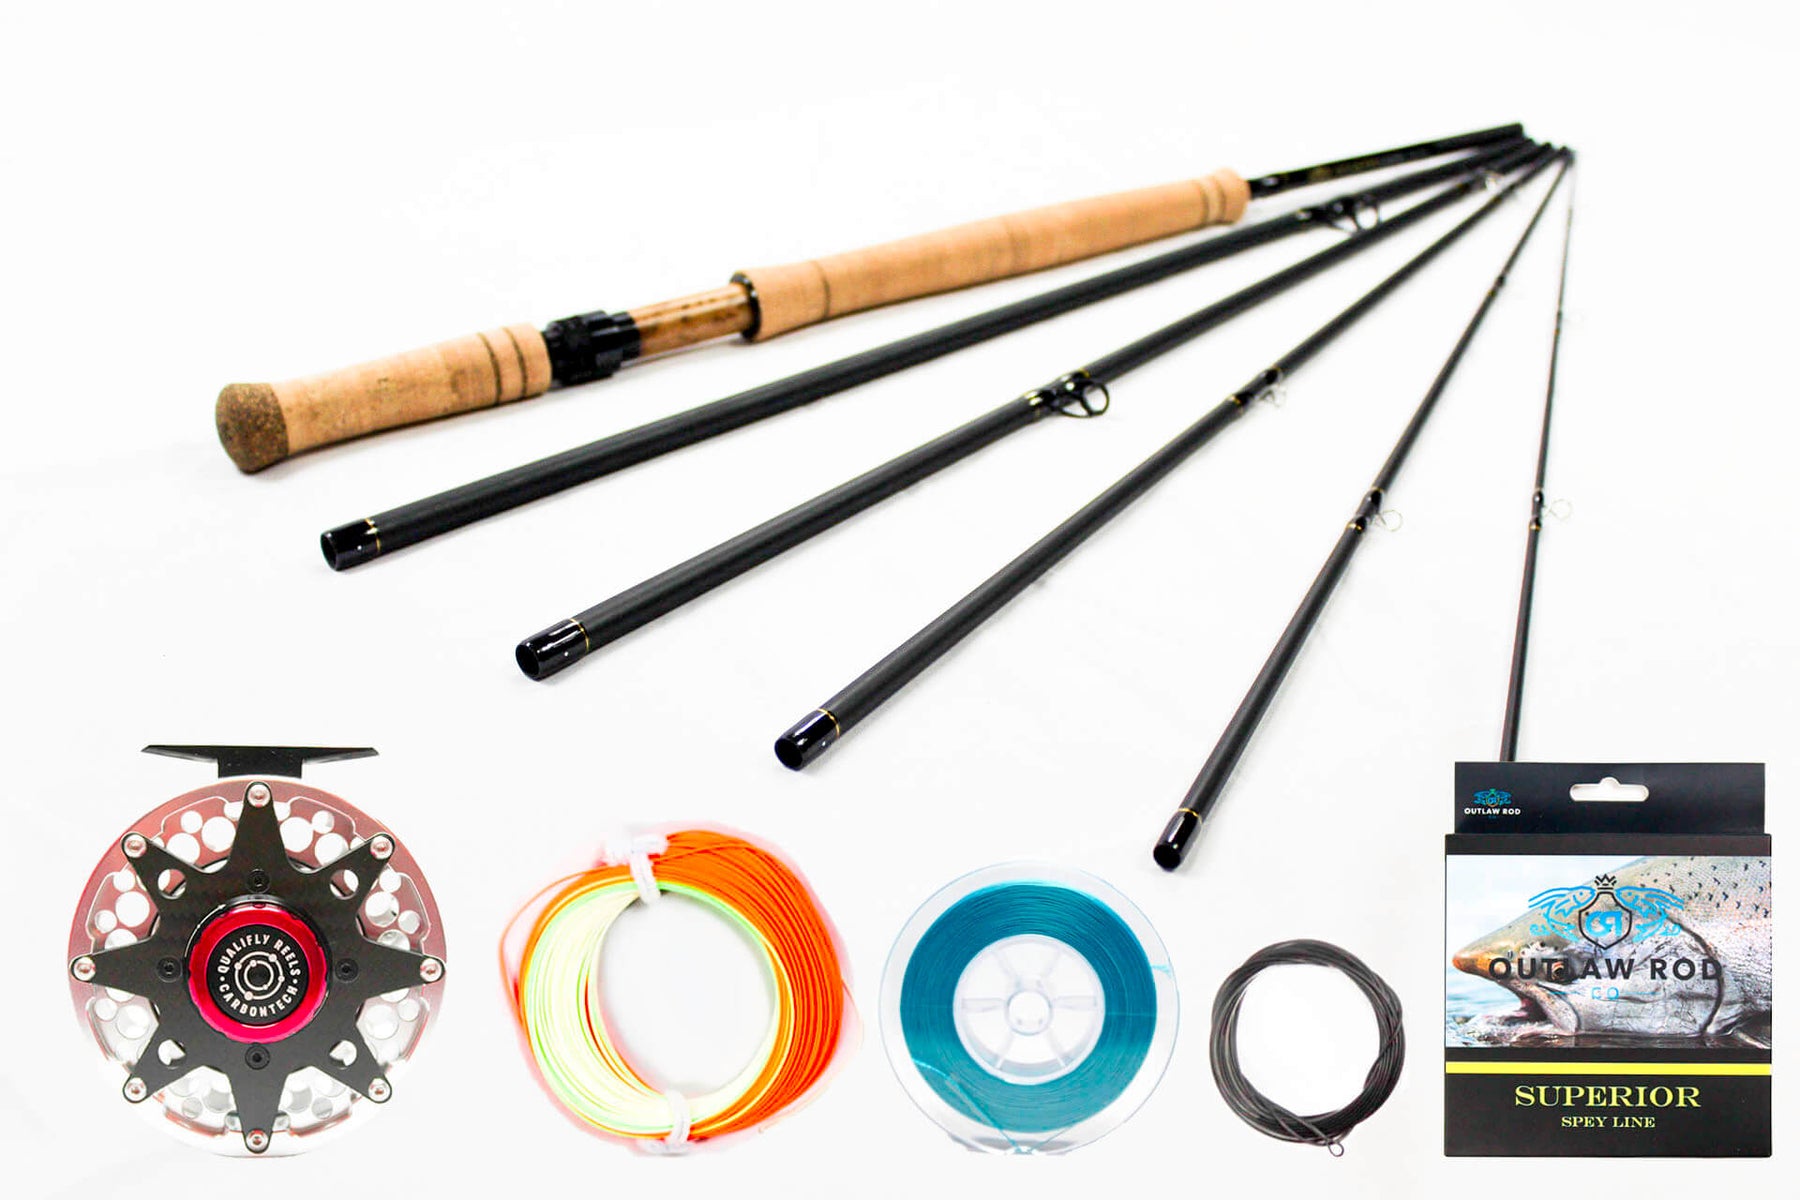 7wt 13ft M-Series (Spey Rod) and Oversized 9-10wt Qualifly